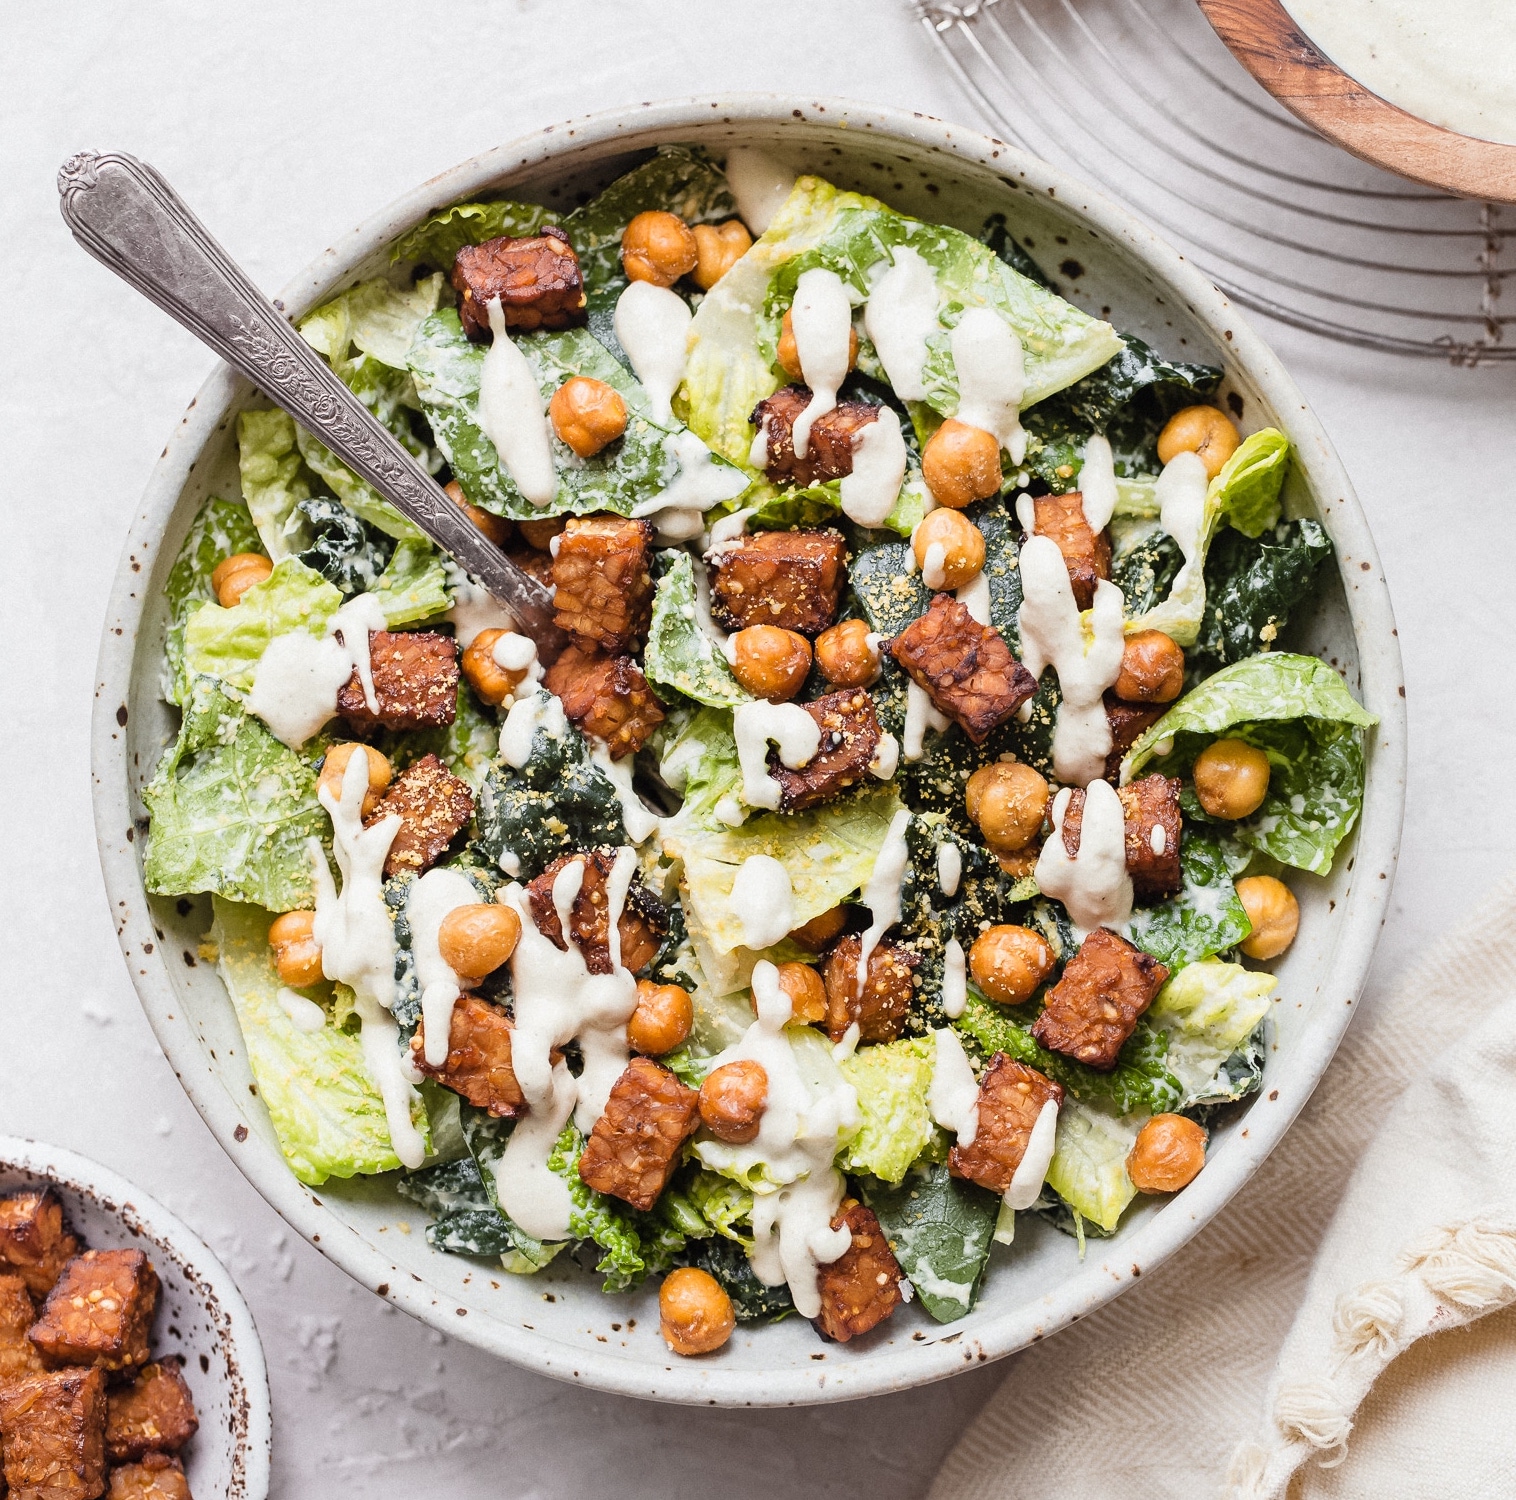 A green Caesar salad is in a white bowl. It is topped with chickpeas and a white Caesar dressing. There is a fork sticking out of the salad.